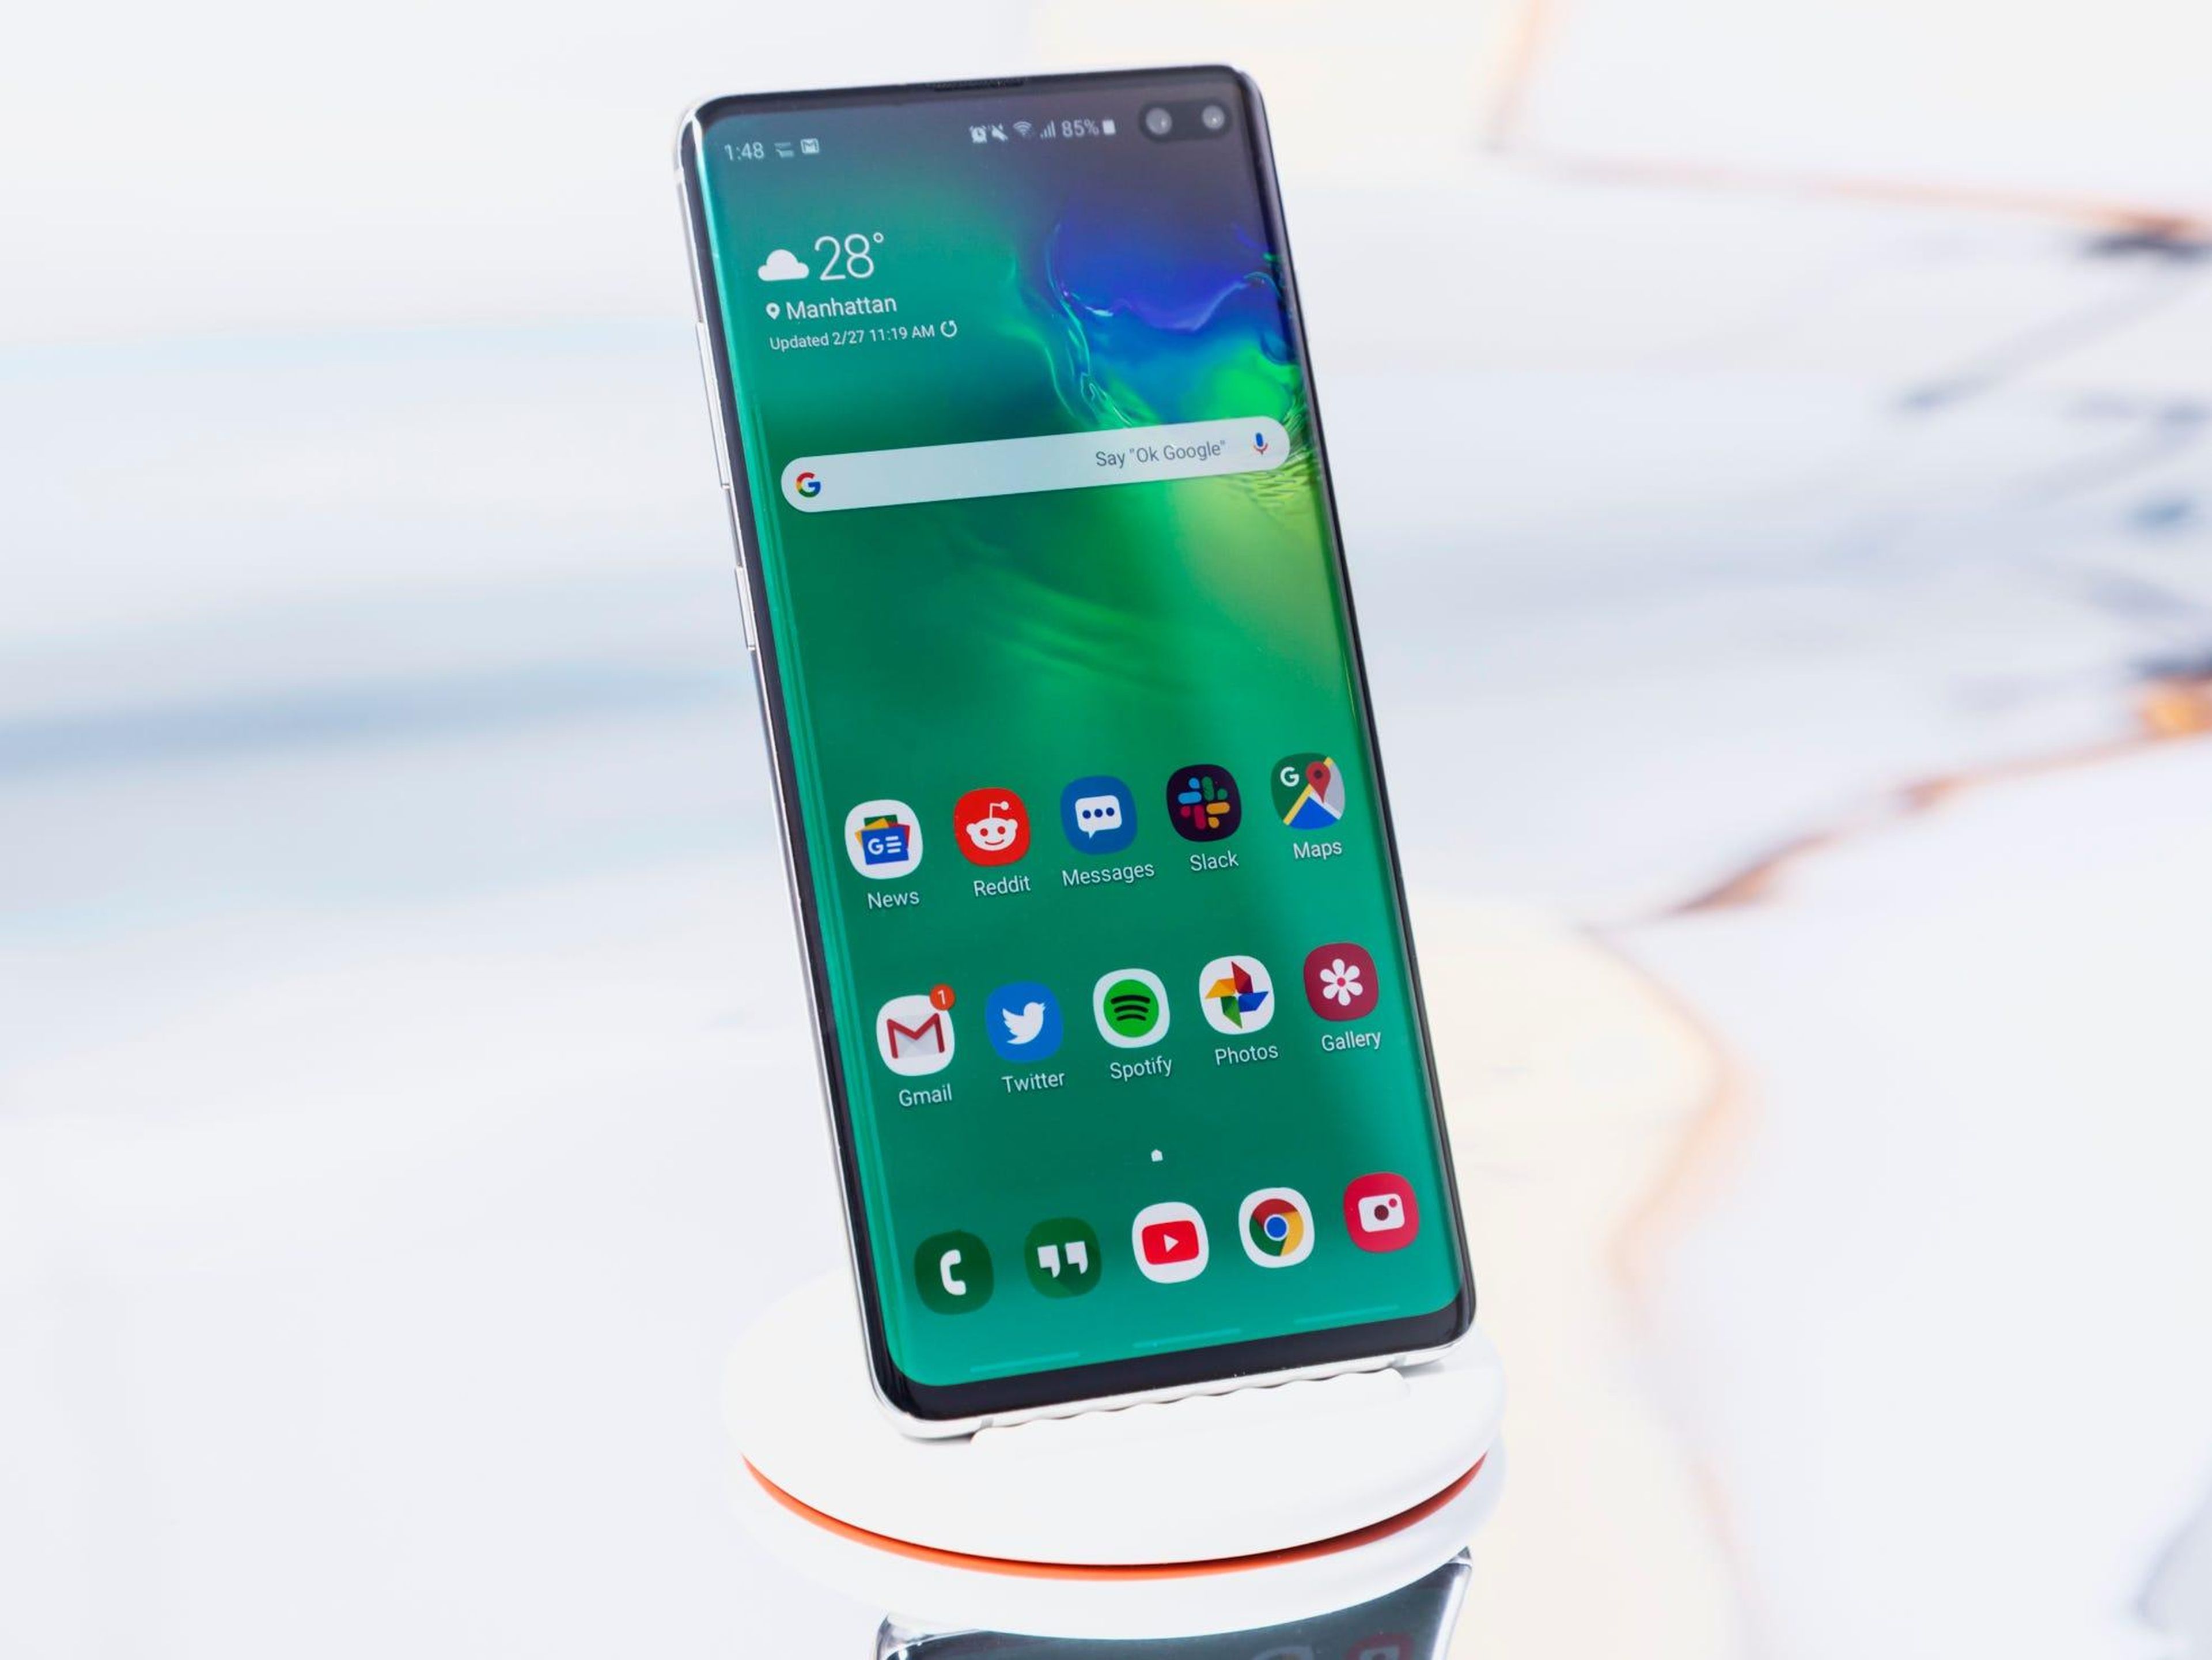 The Galaxy S10 has a lot of the same other features of the S20, like reverse wireless charging, an in-screen fingerprint sensor, and a borderless screen.